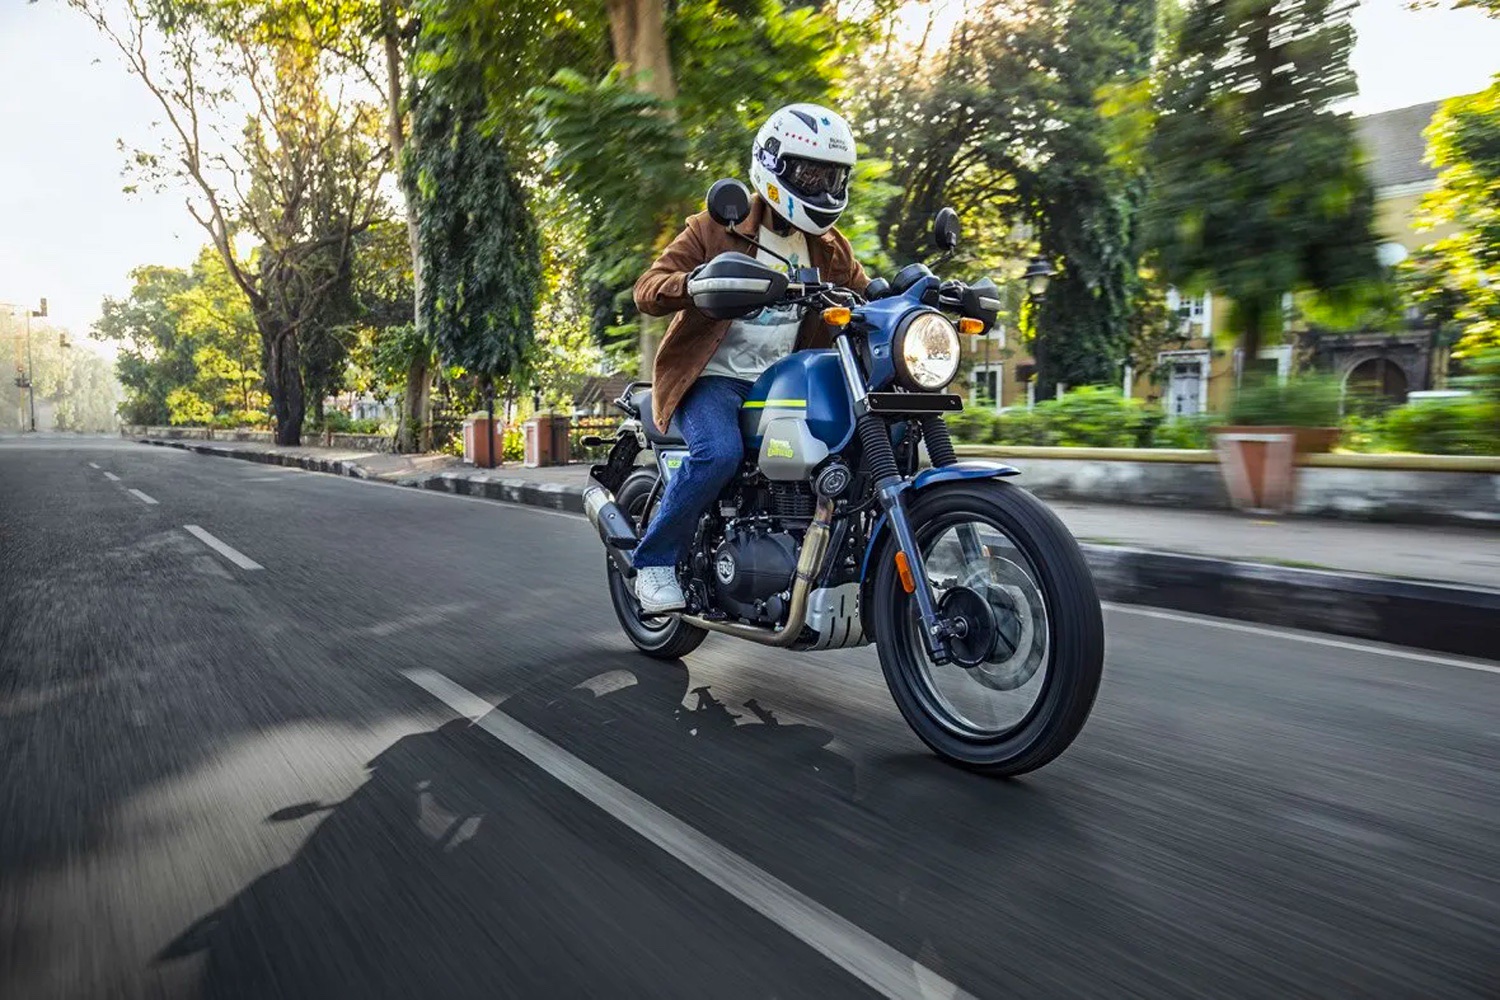 A 2022 Royal Enfield Scram 411 motorcycle on a urban road in India